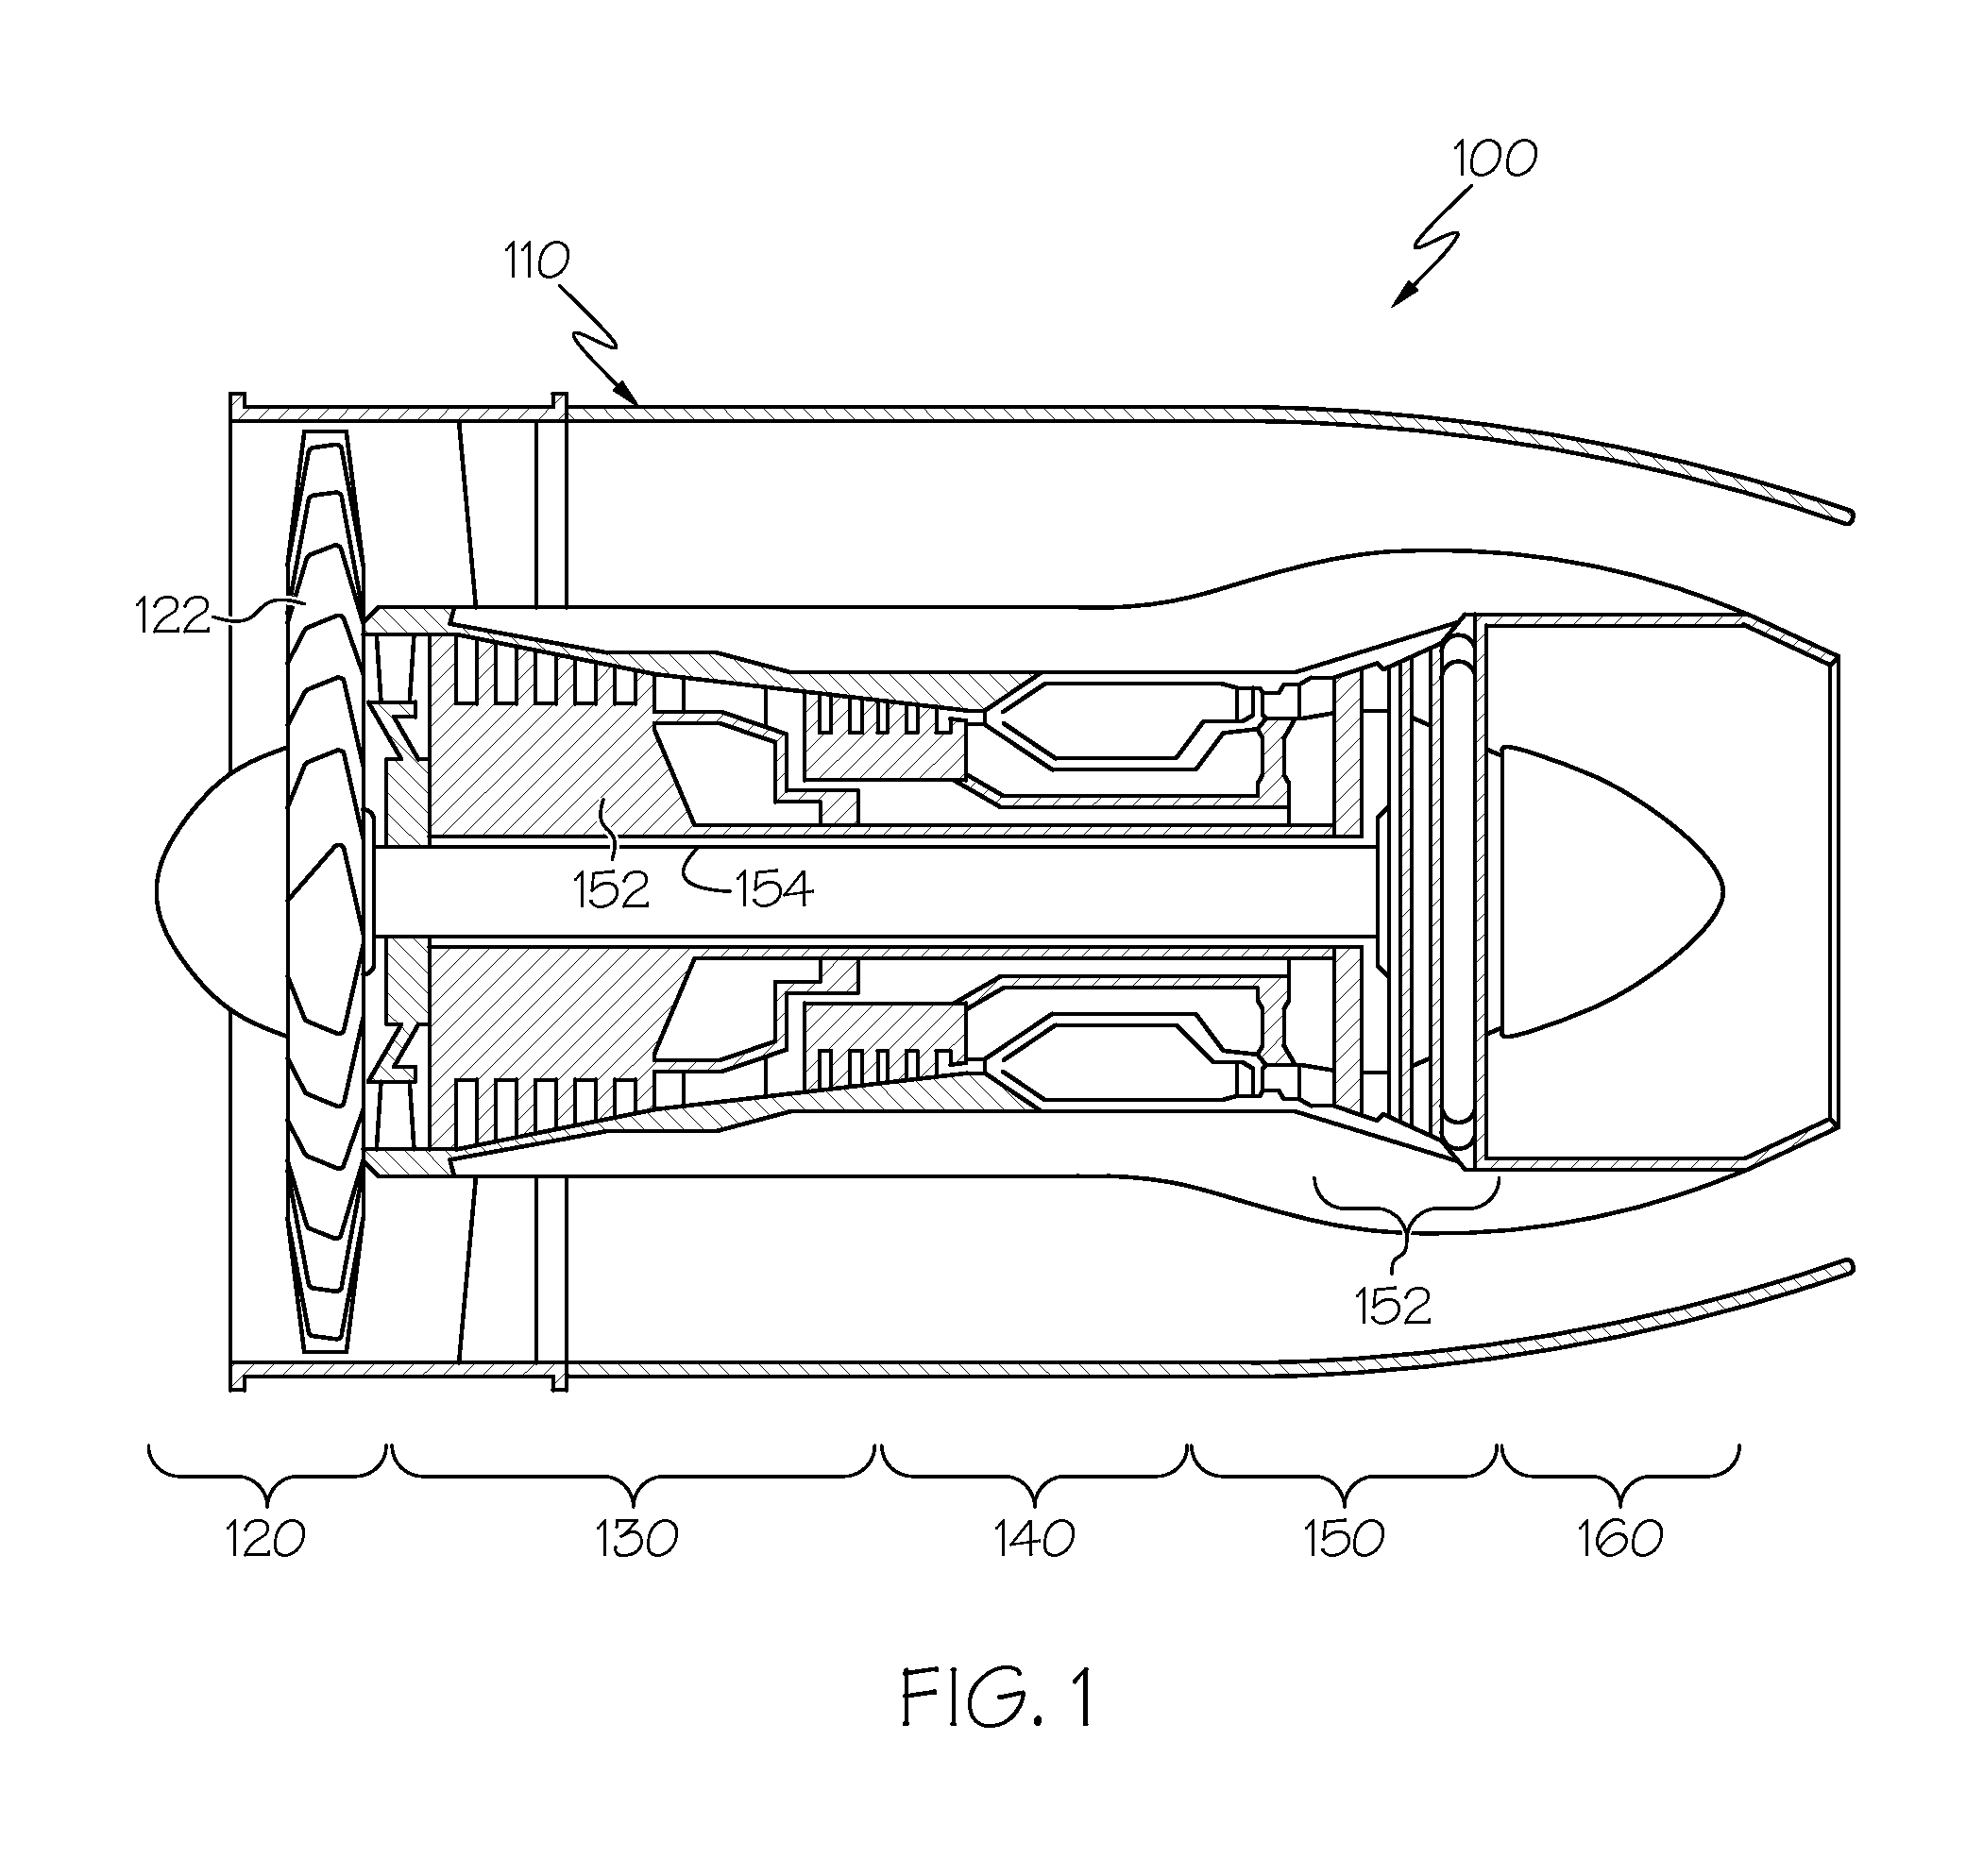 Gas turbine engines with plug resistant effusion cooling holes